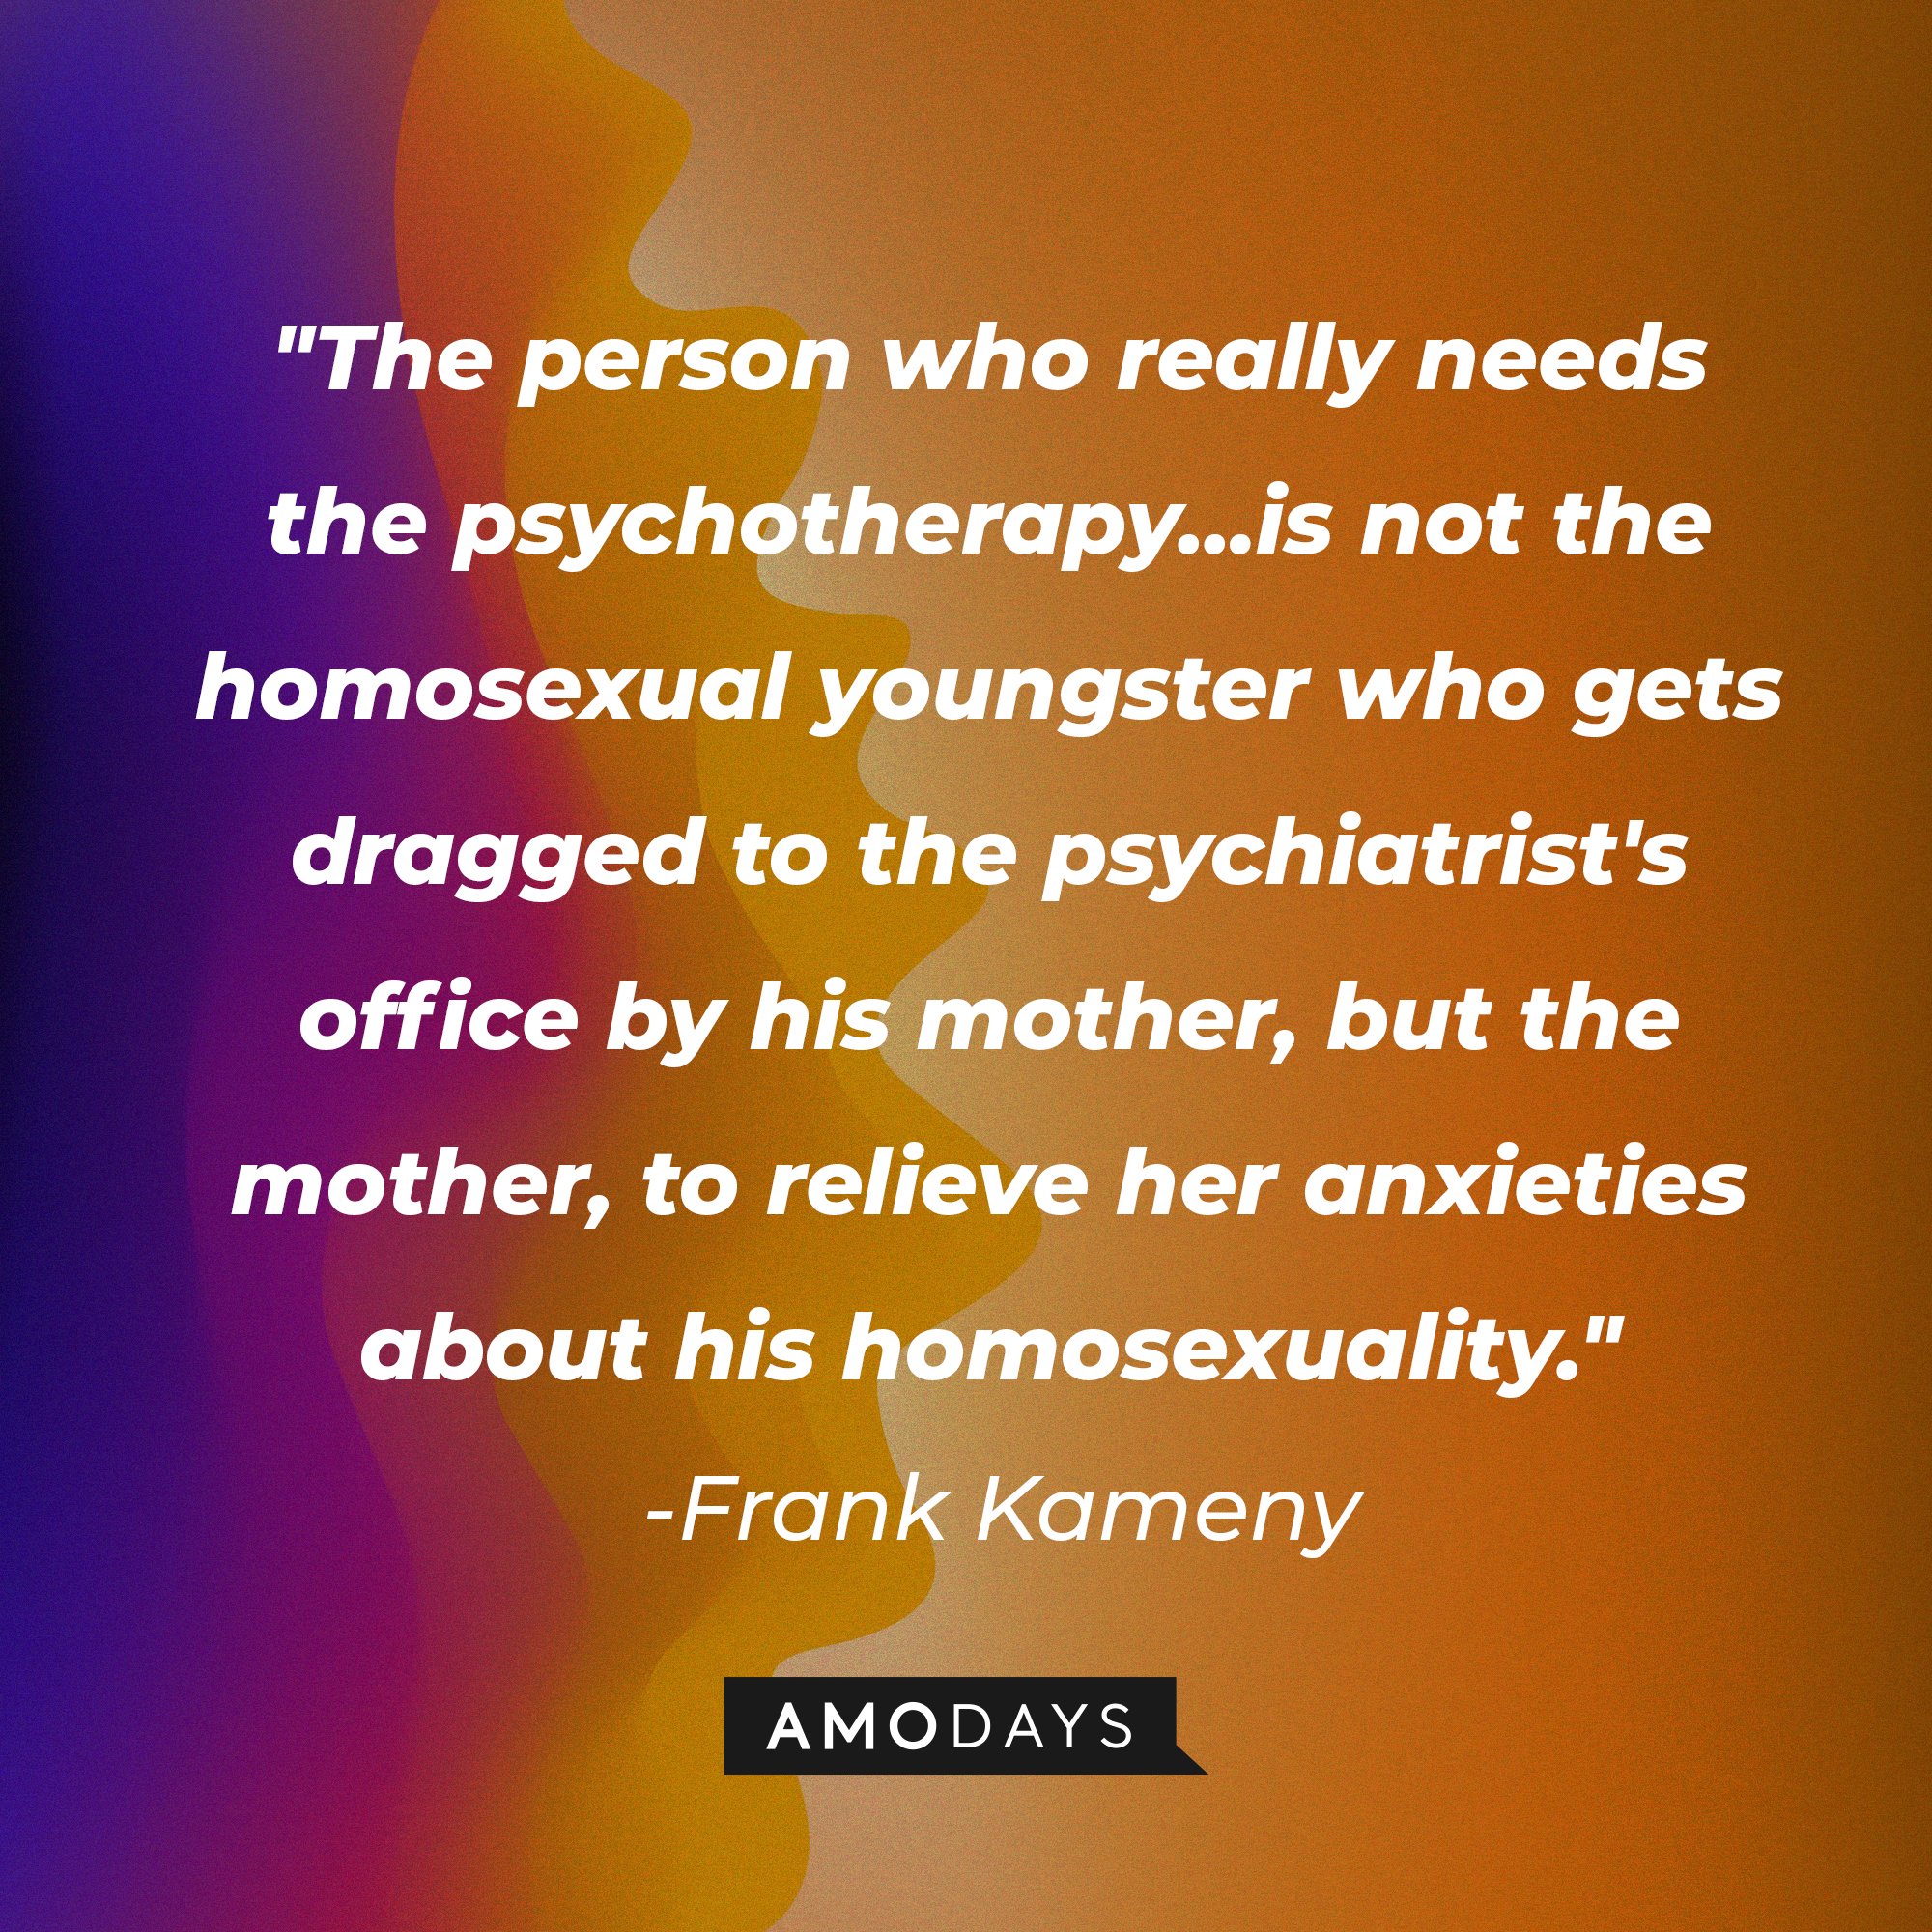 Frank Kameny's quote: "The person who really needs the psychotherapy…is not the homosexual youngster who gets dragged to the psychiatrist's office by his mother, but the mother, to relieve her anxieties about his homosexuality." | Image: AmoDays